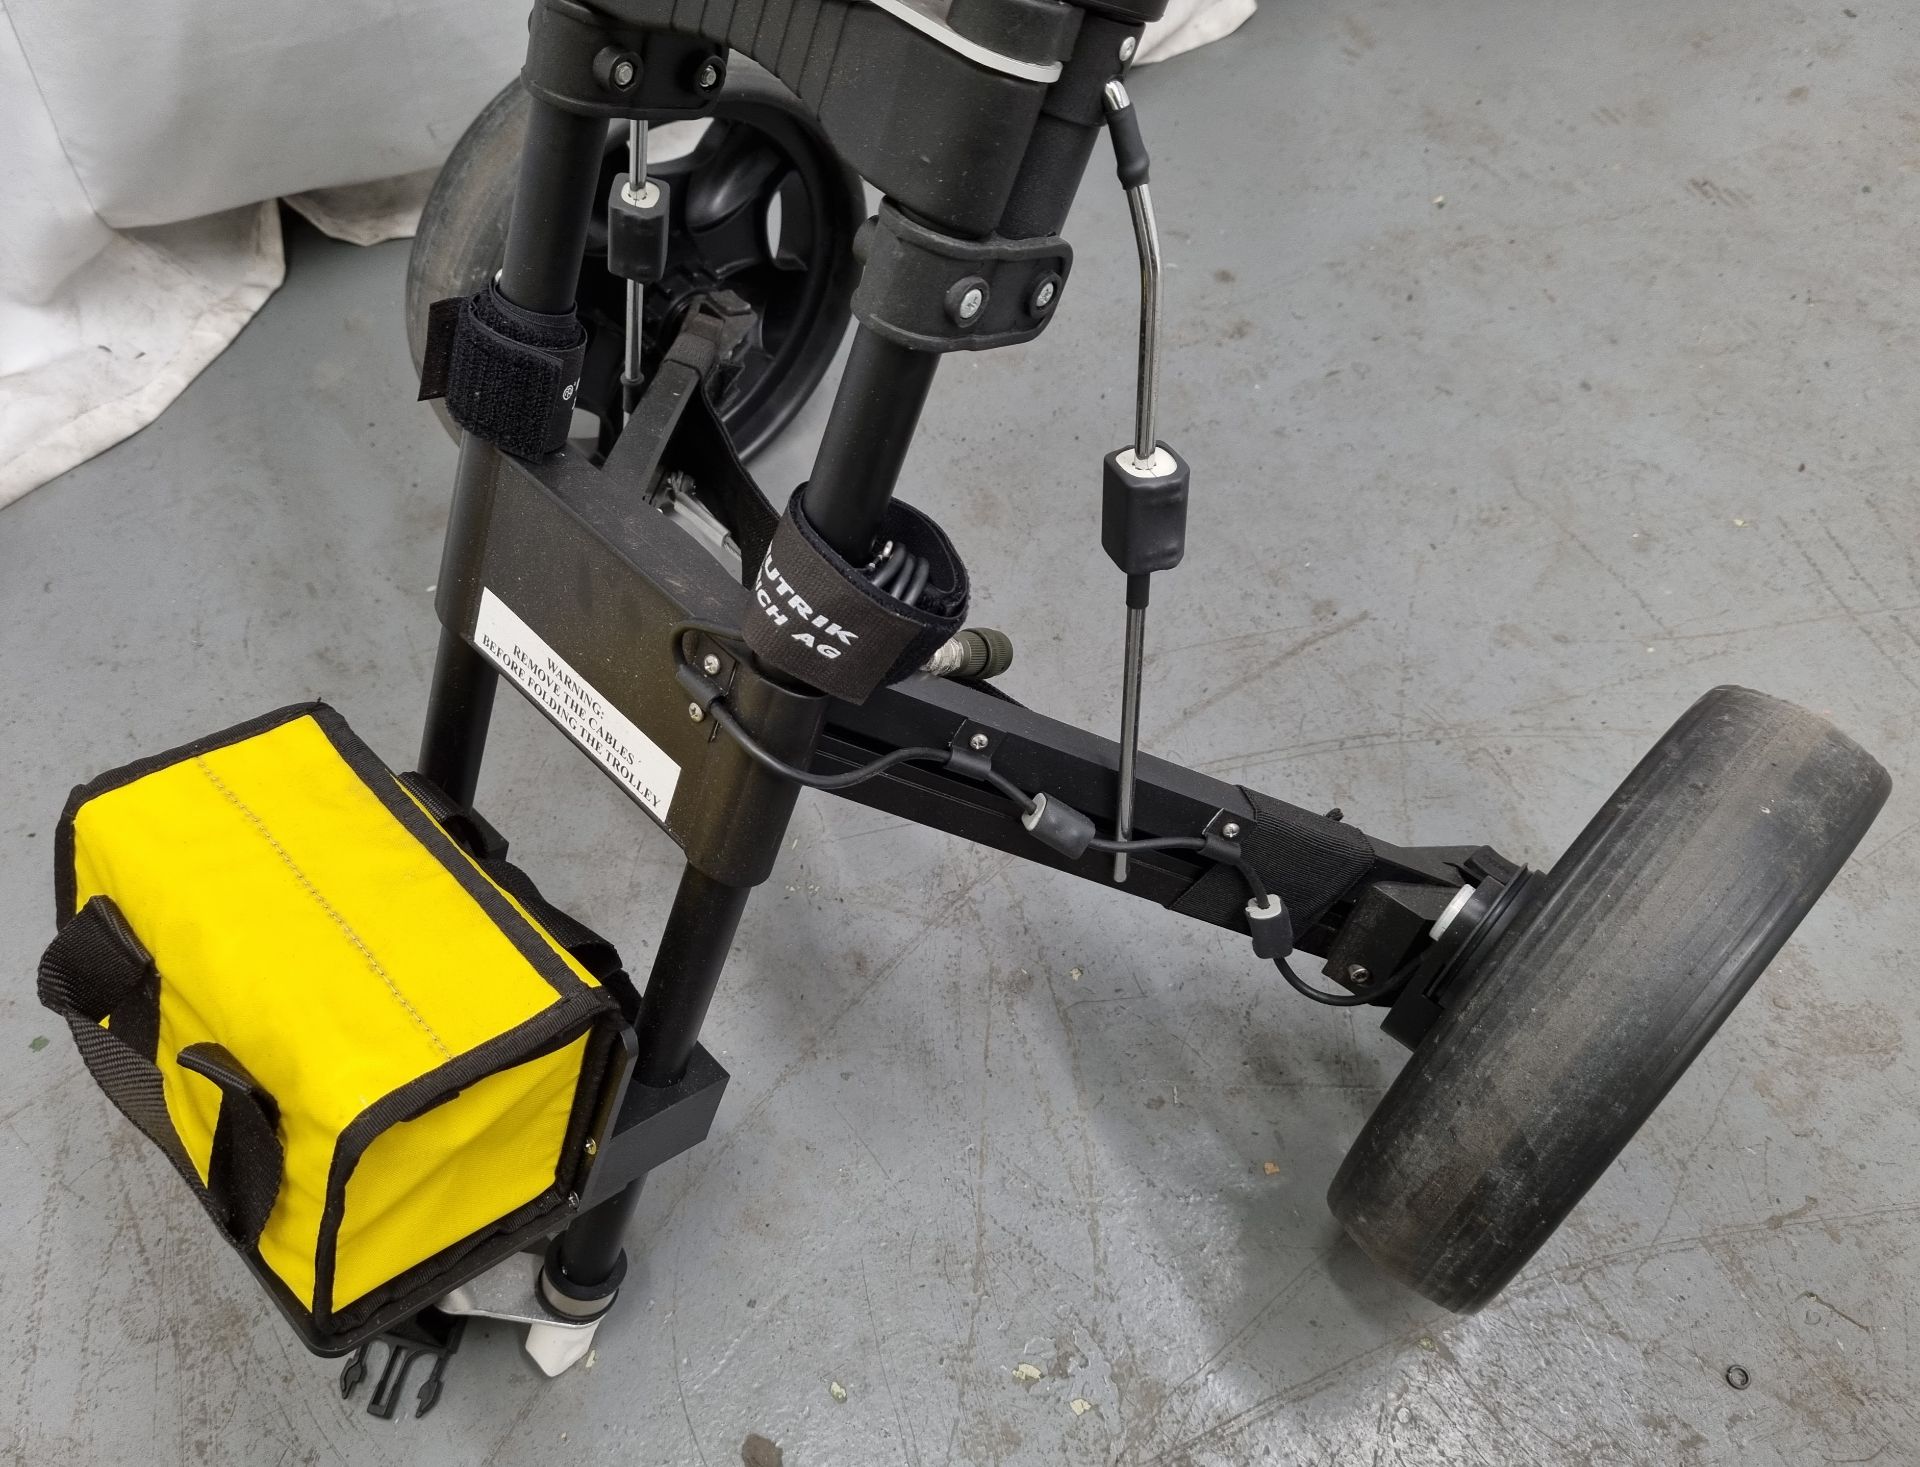 IDS Detector Duo ground-penetrating radar equipment with accessories - Image 14 of 40